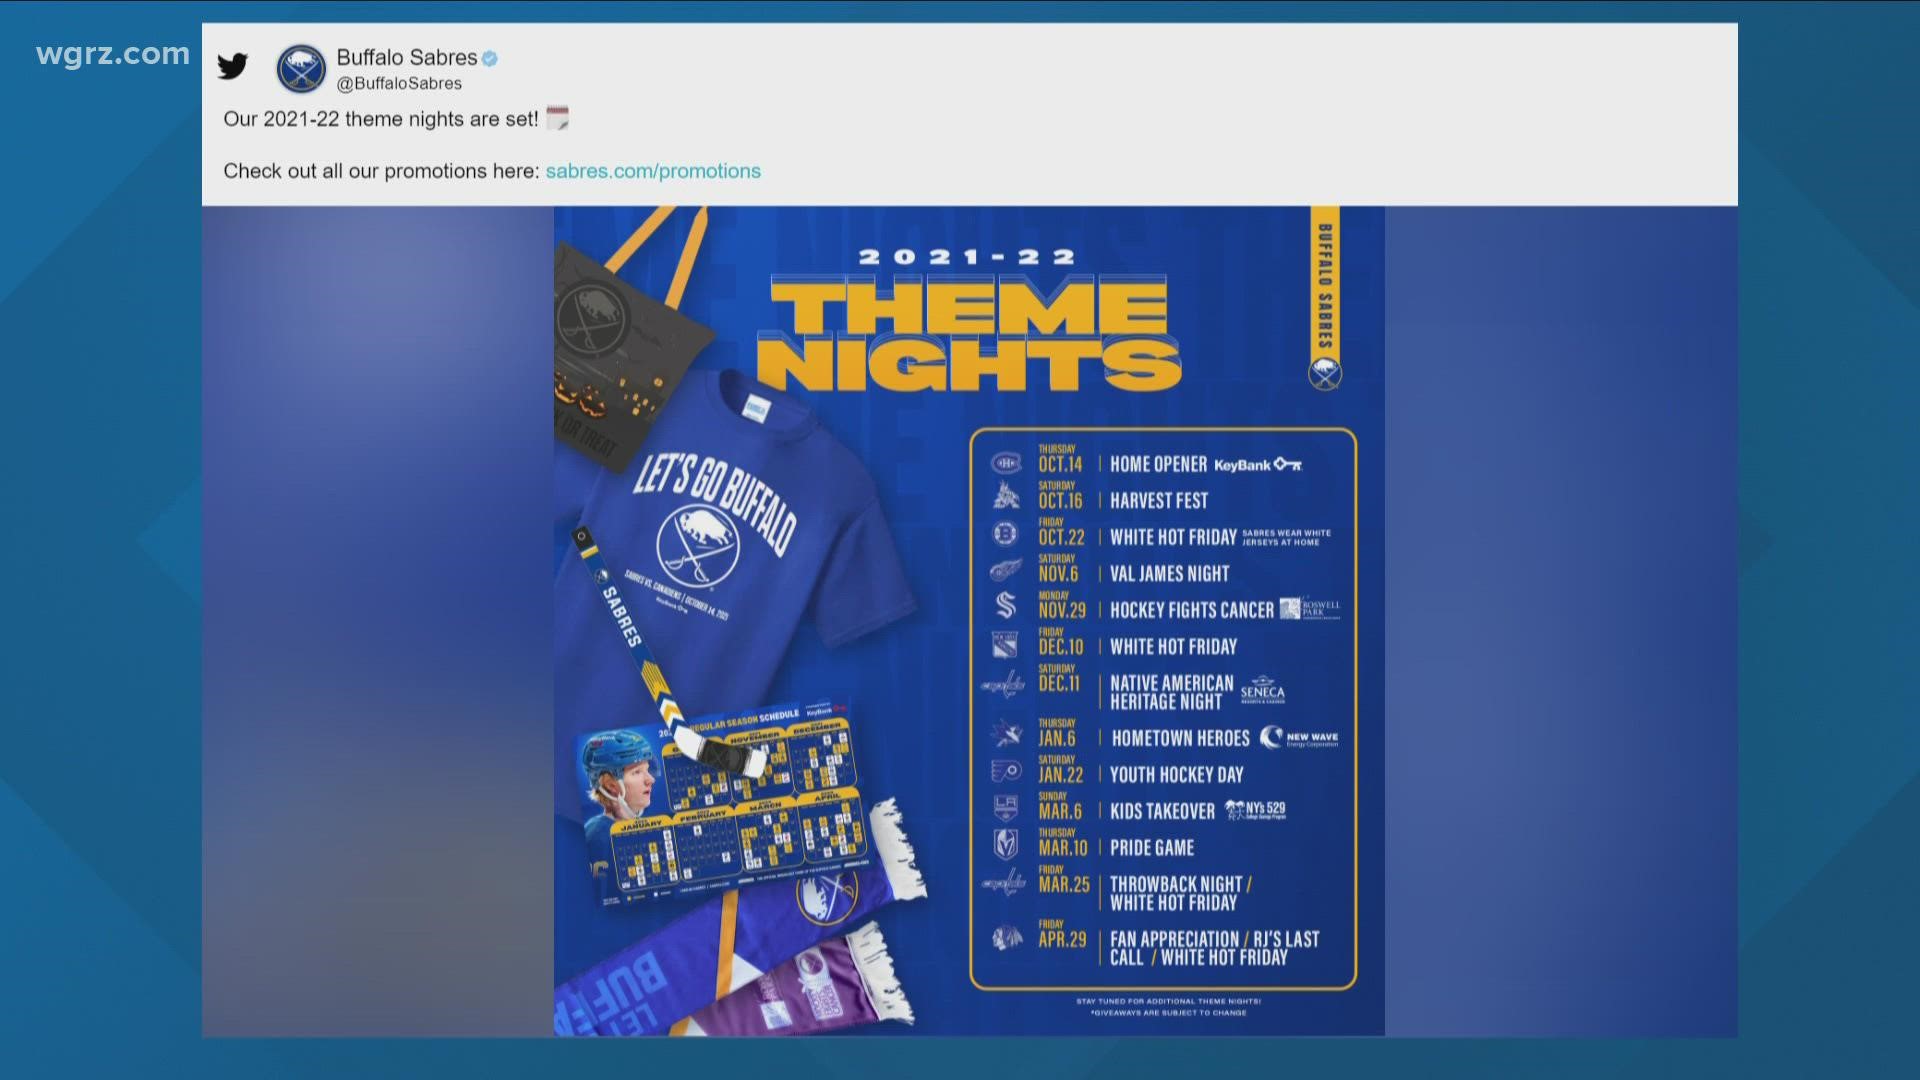 Sabres announce 2021-22 theme nights at the arena